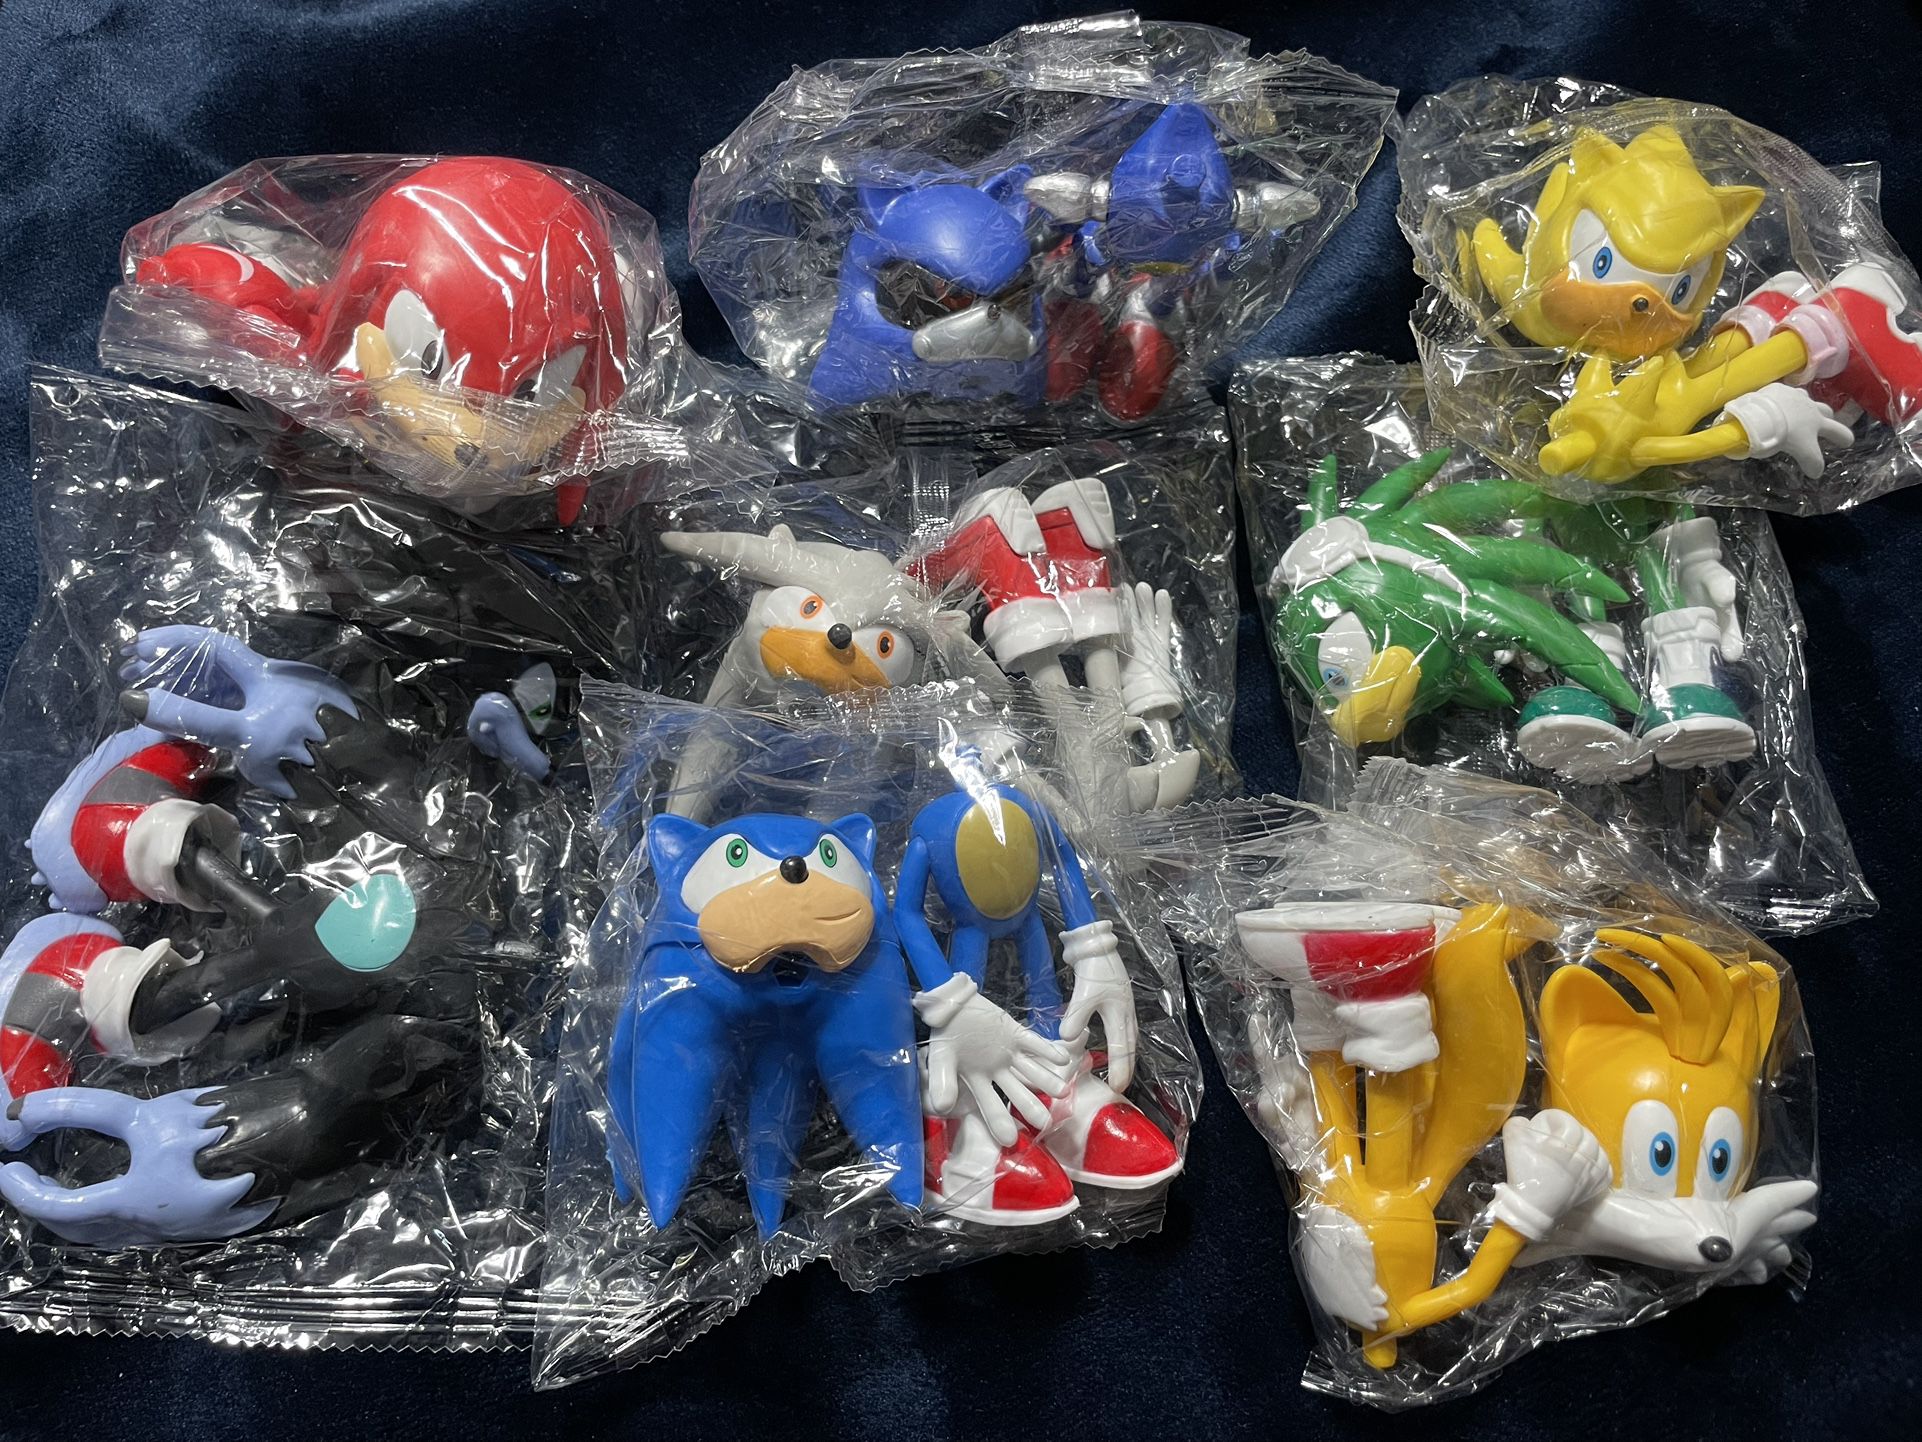 Sonic Action Figures, 4.8-5 inch Tall